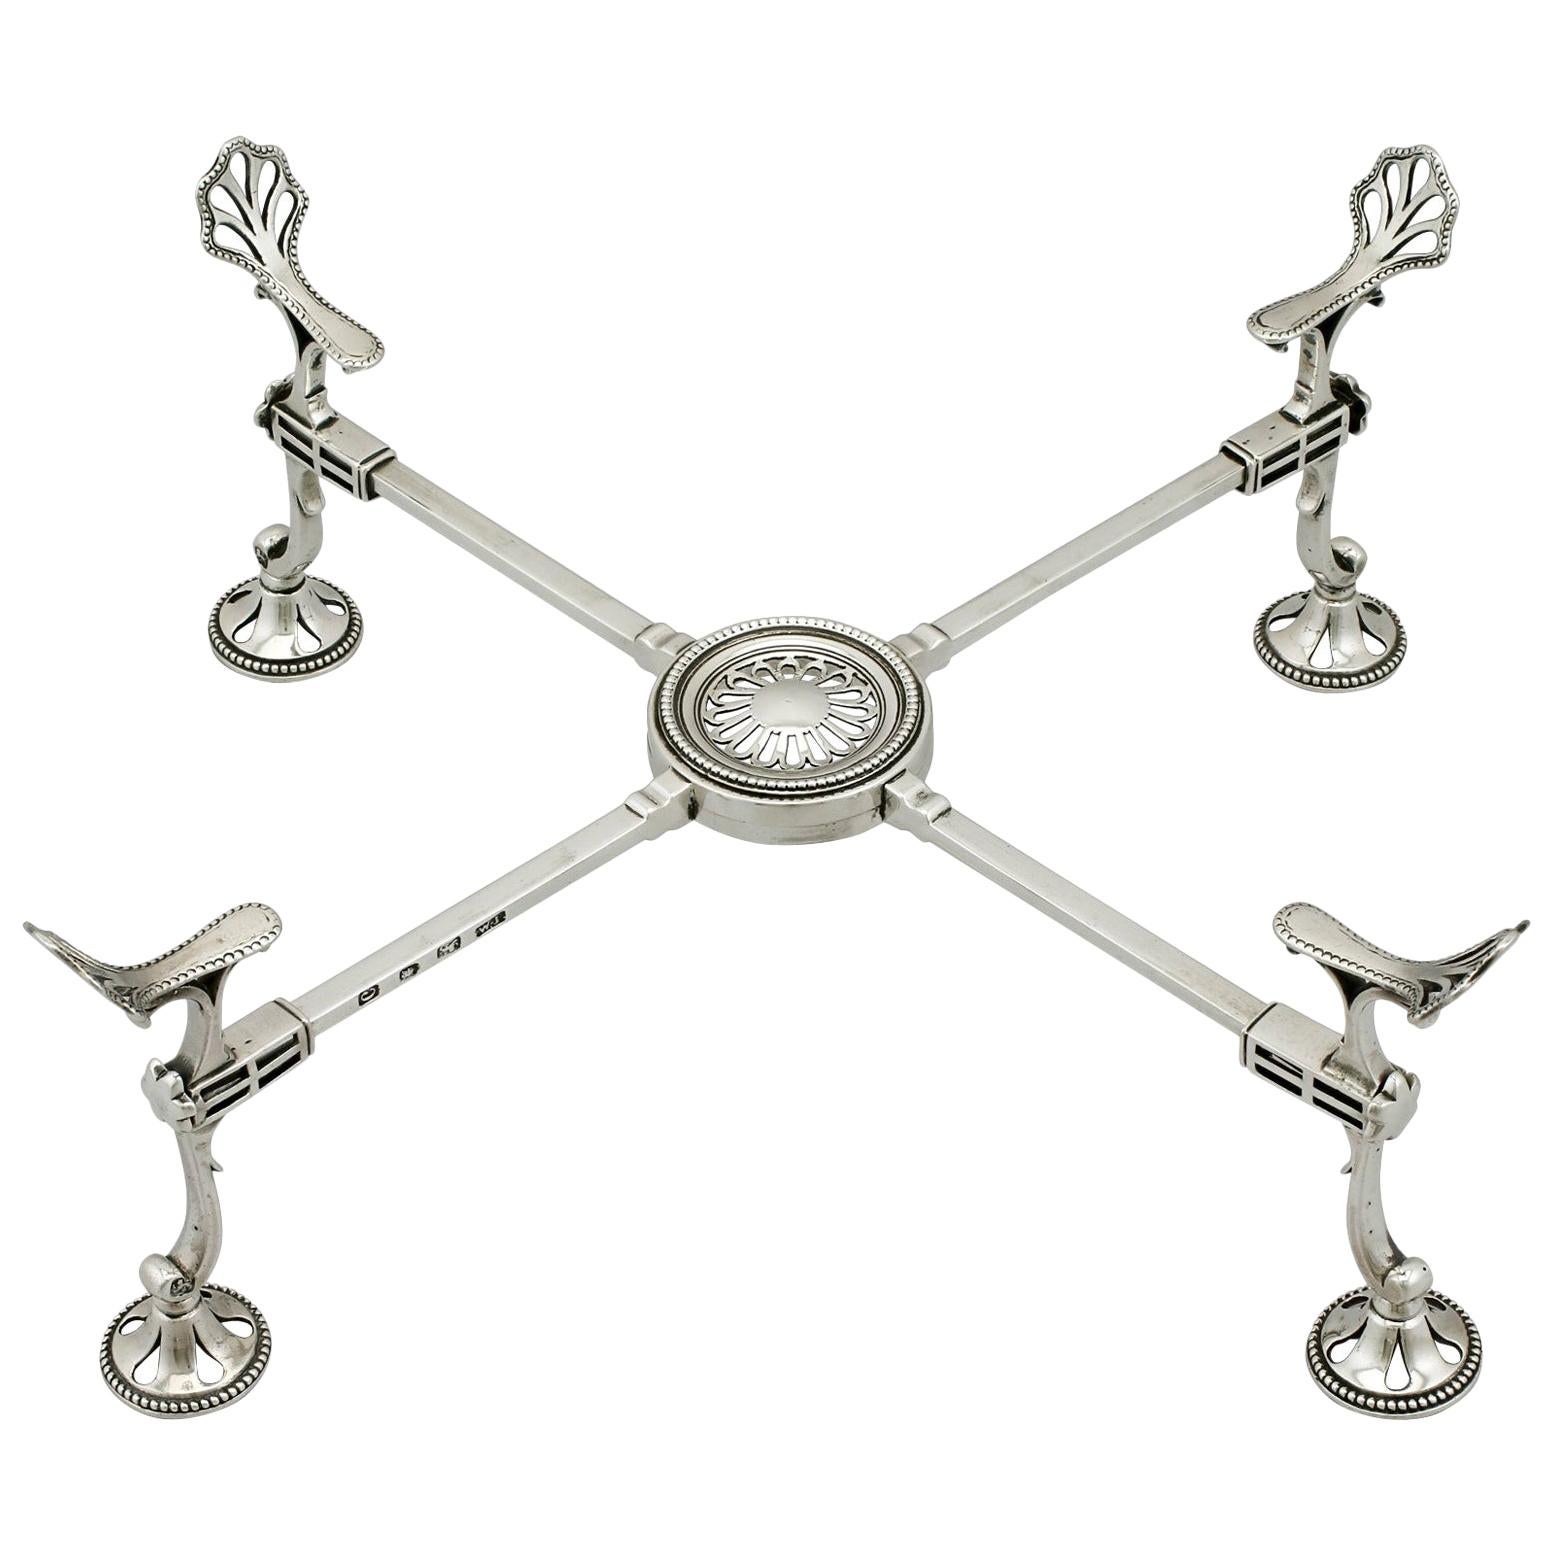 Sterling Silver Dish Cross, Antique George III, '1778'